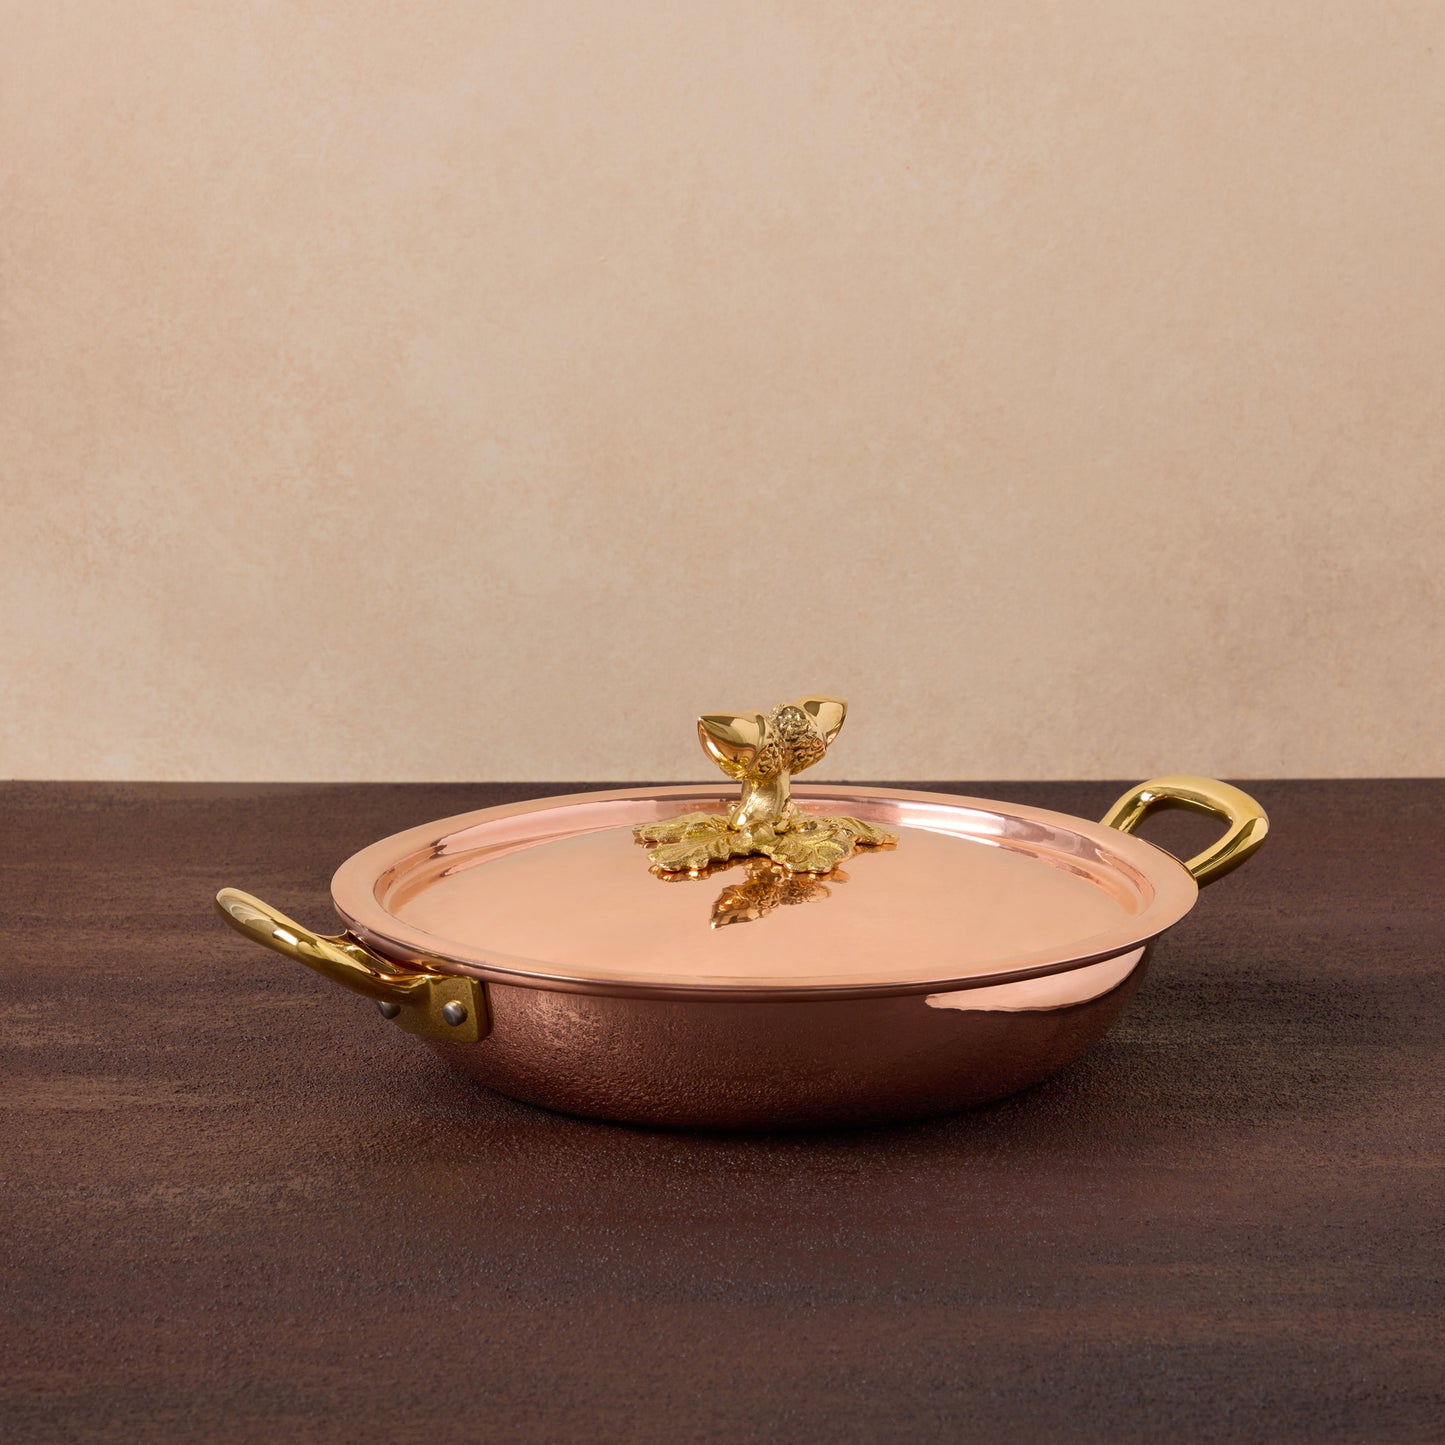 A classic with a twist - Ruffoni copper frying pan with two side handles to ensure a convenient and elegant transition from stovetop to oven and tabletop. Explore timeless craftsmanship now